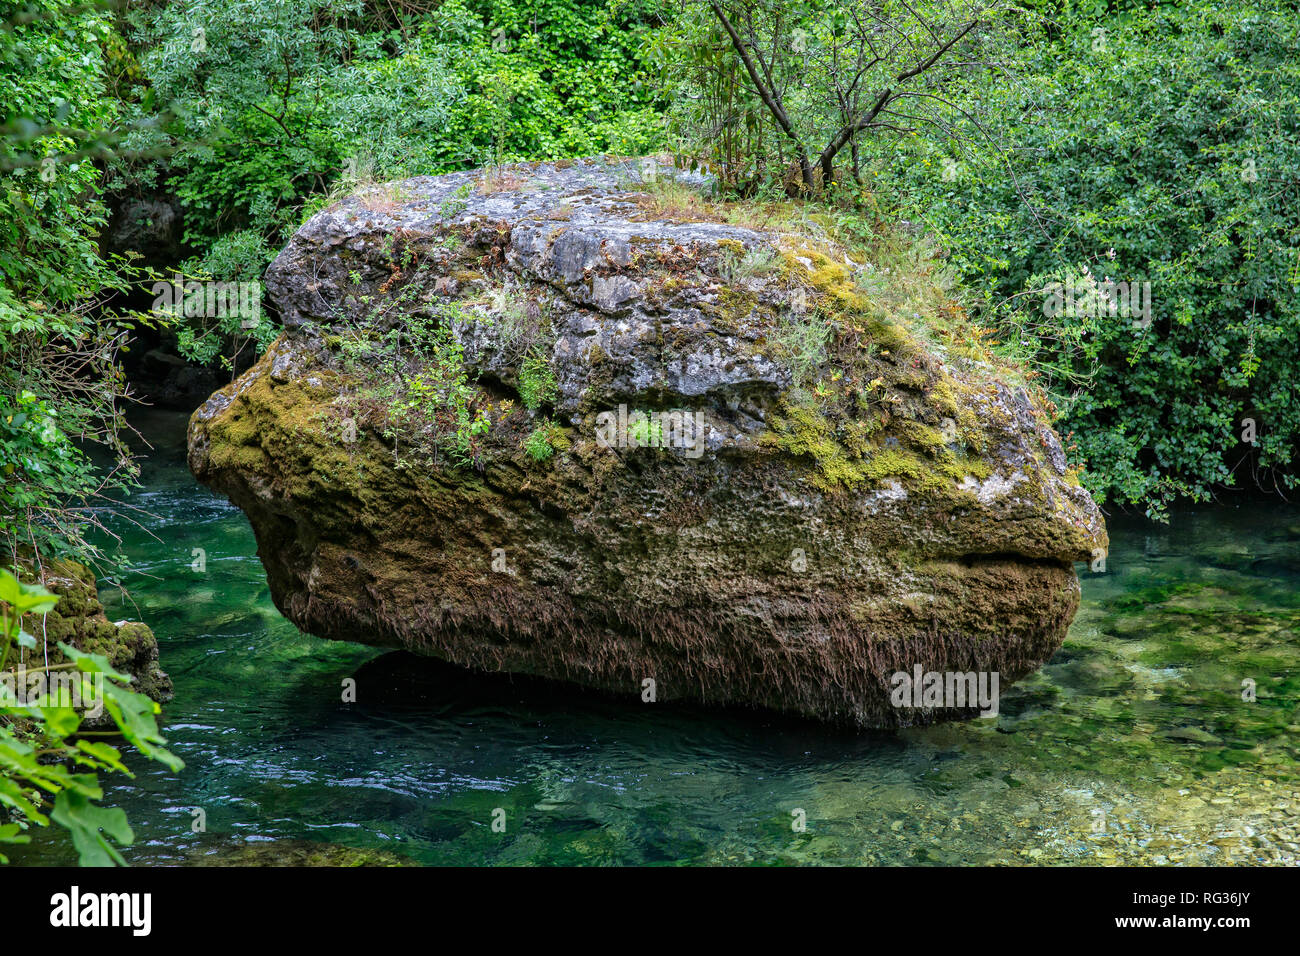 The big rockfish. Big mossy Rock on the river Sorgue, Fontaine de Vaucluse, Provence, Luberon, Vaucluse, France Stock Photo